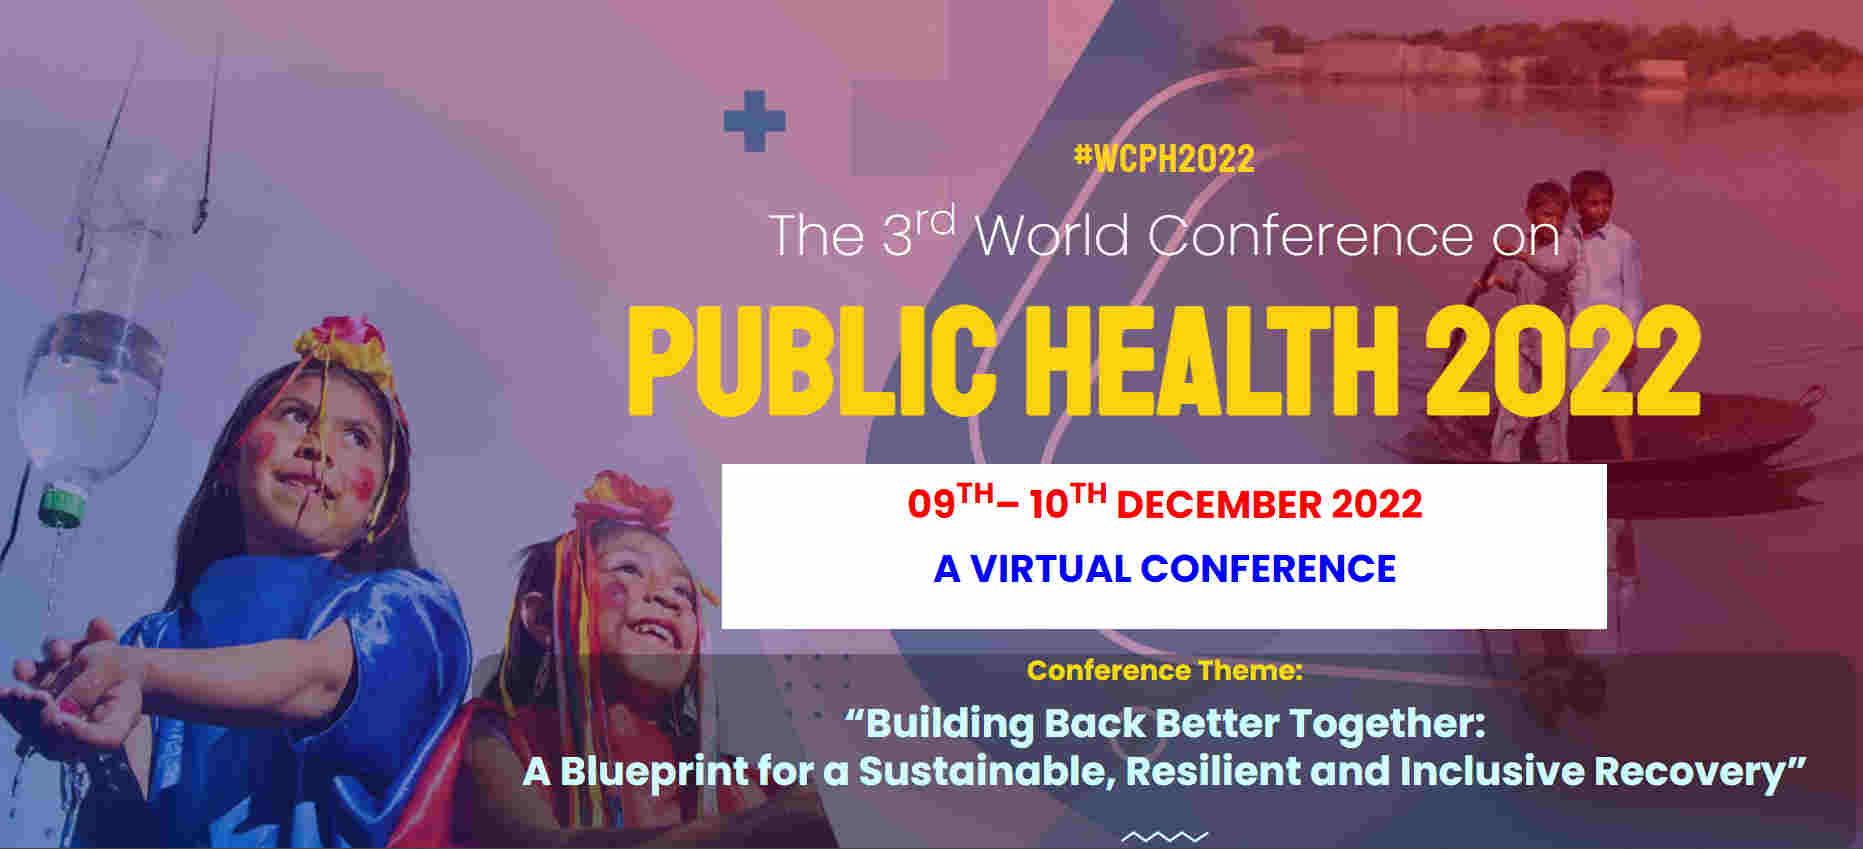 The 3rd World Conference on Public Health 2022 - WCPH 2022